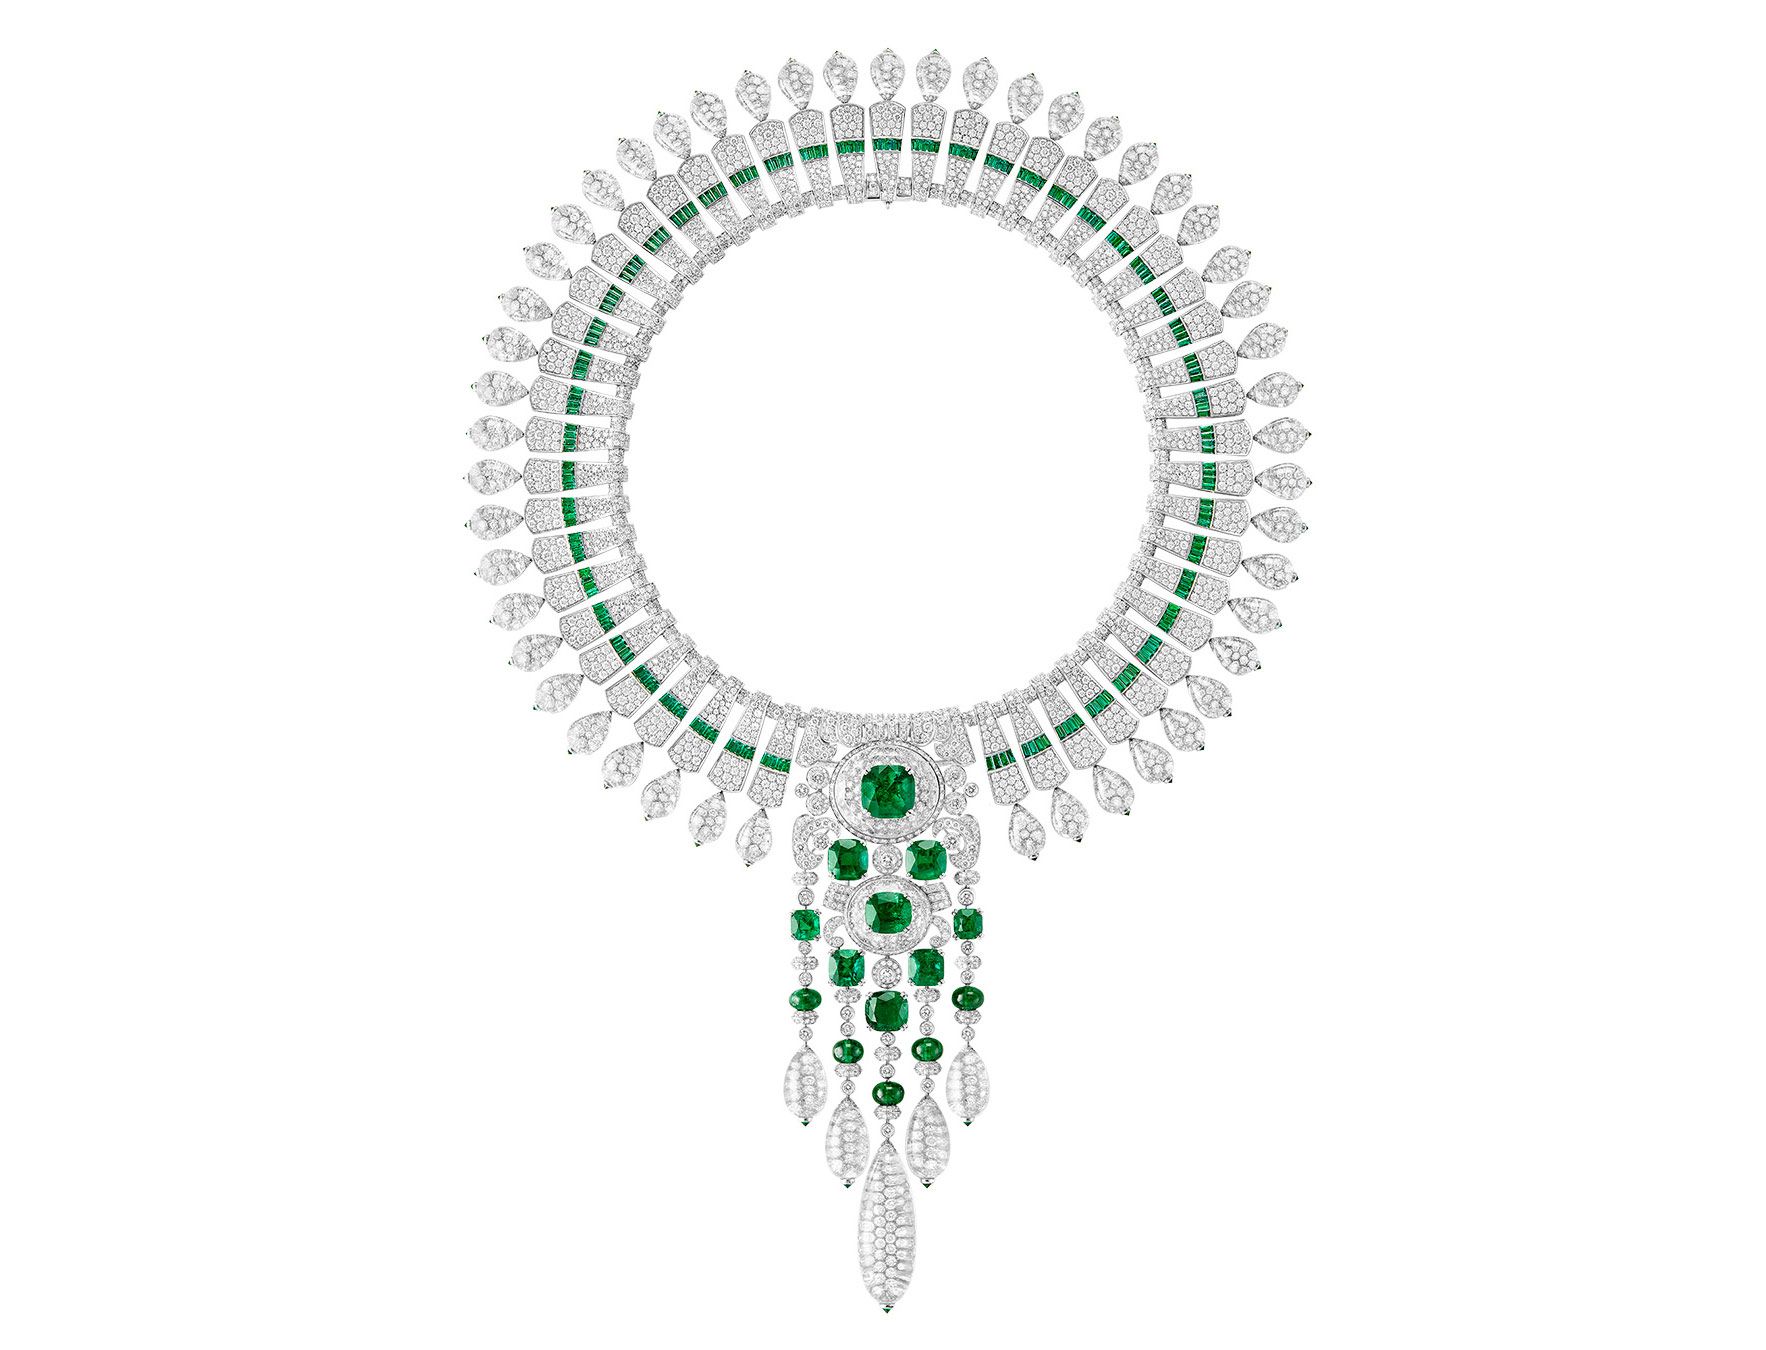 Boucheron New Maharajas High Jewellery necklace in emeralds and diamonds with a detachable front piece that converts into a brooch